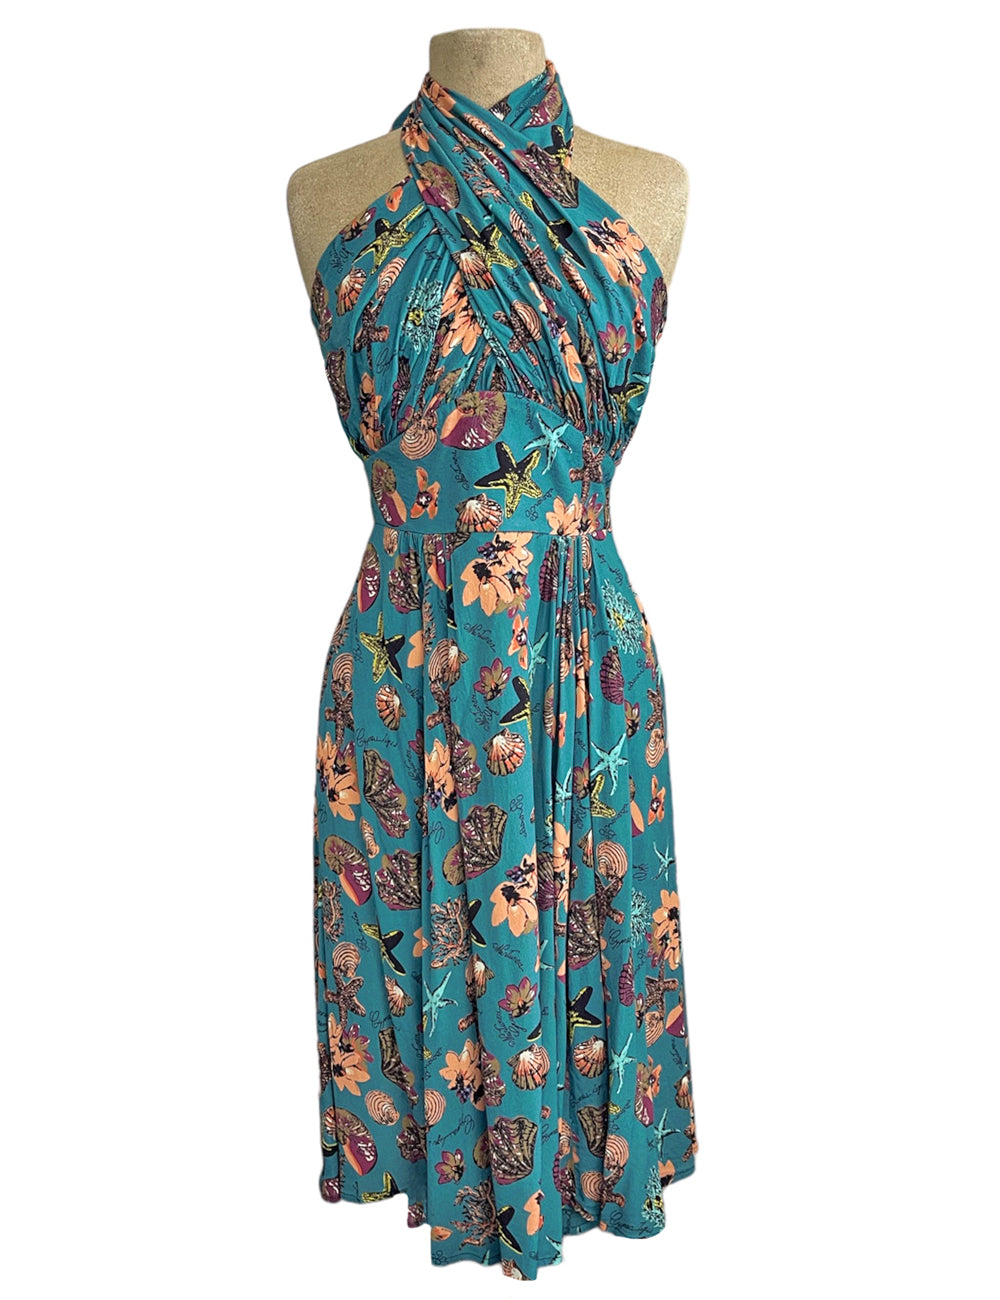 Doris Mayday for Loco Lindo - Teal Star of the Sea Mayday Halter Swing Dress